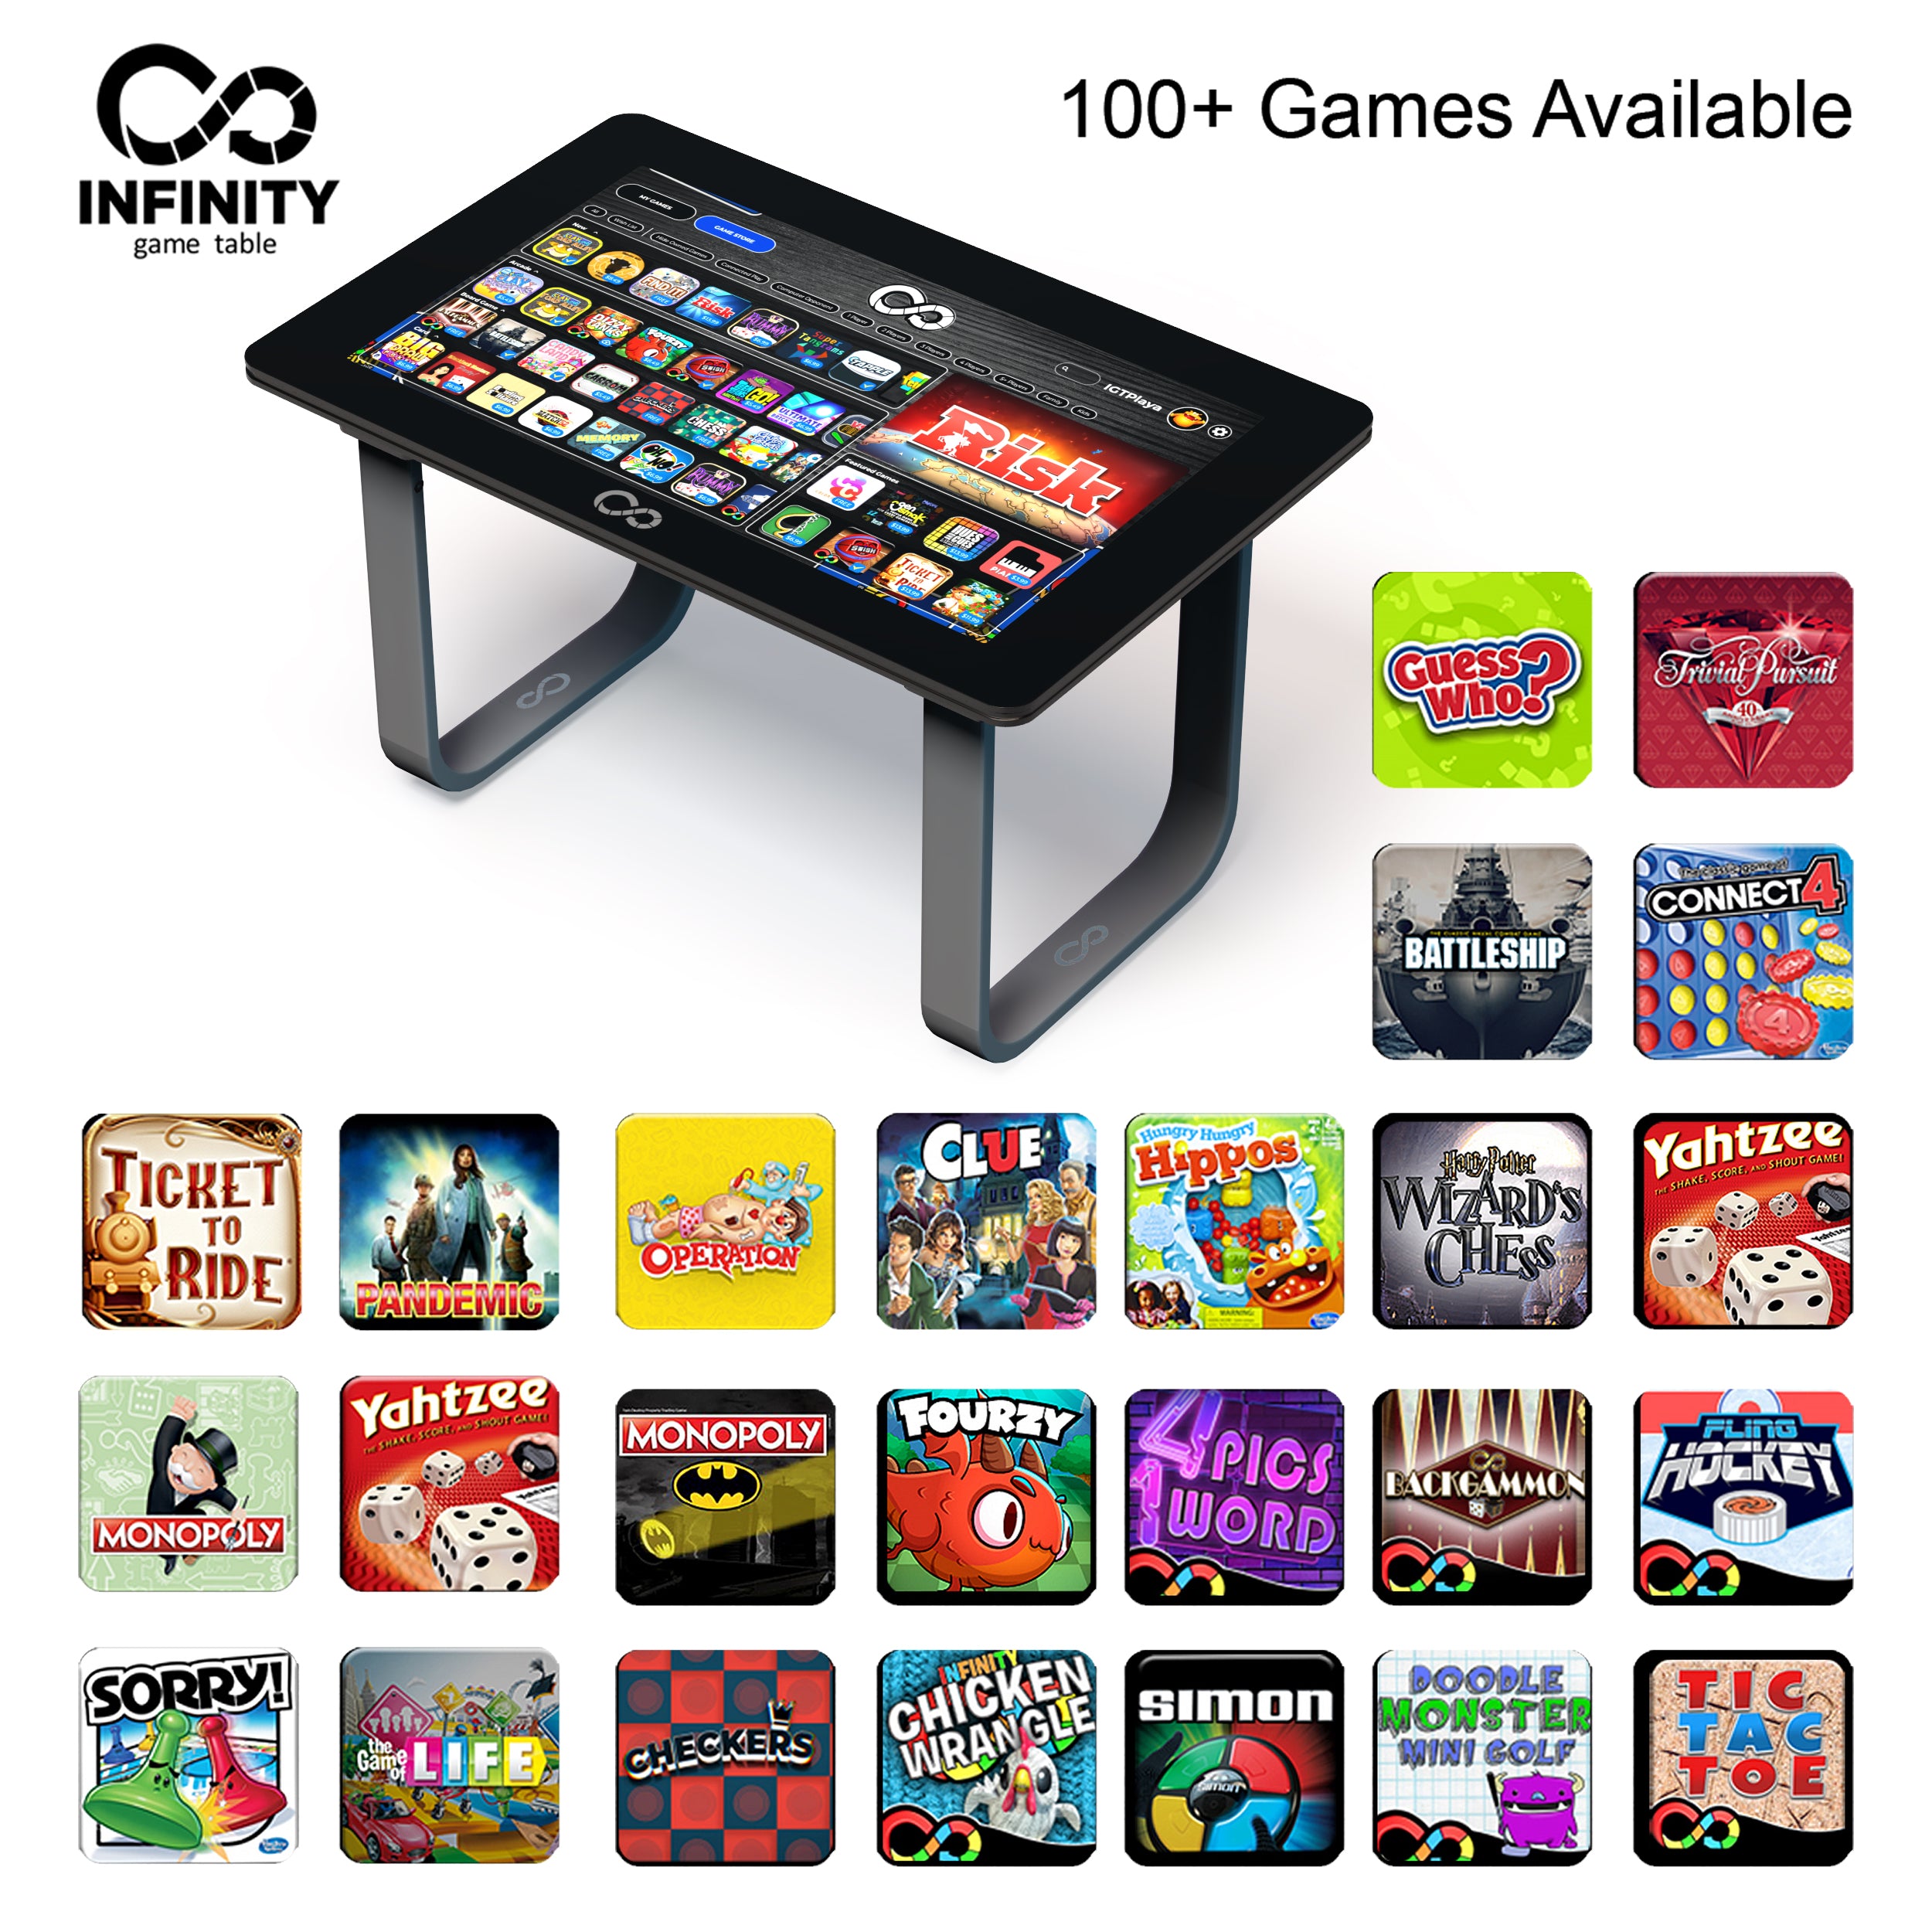 Infinity Game Table (32")